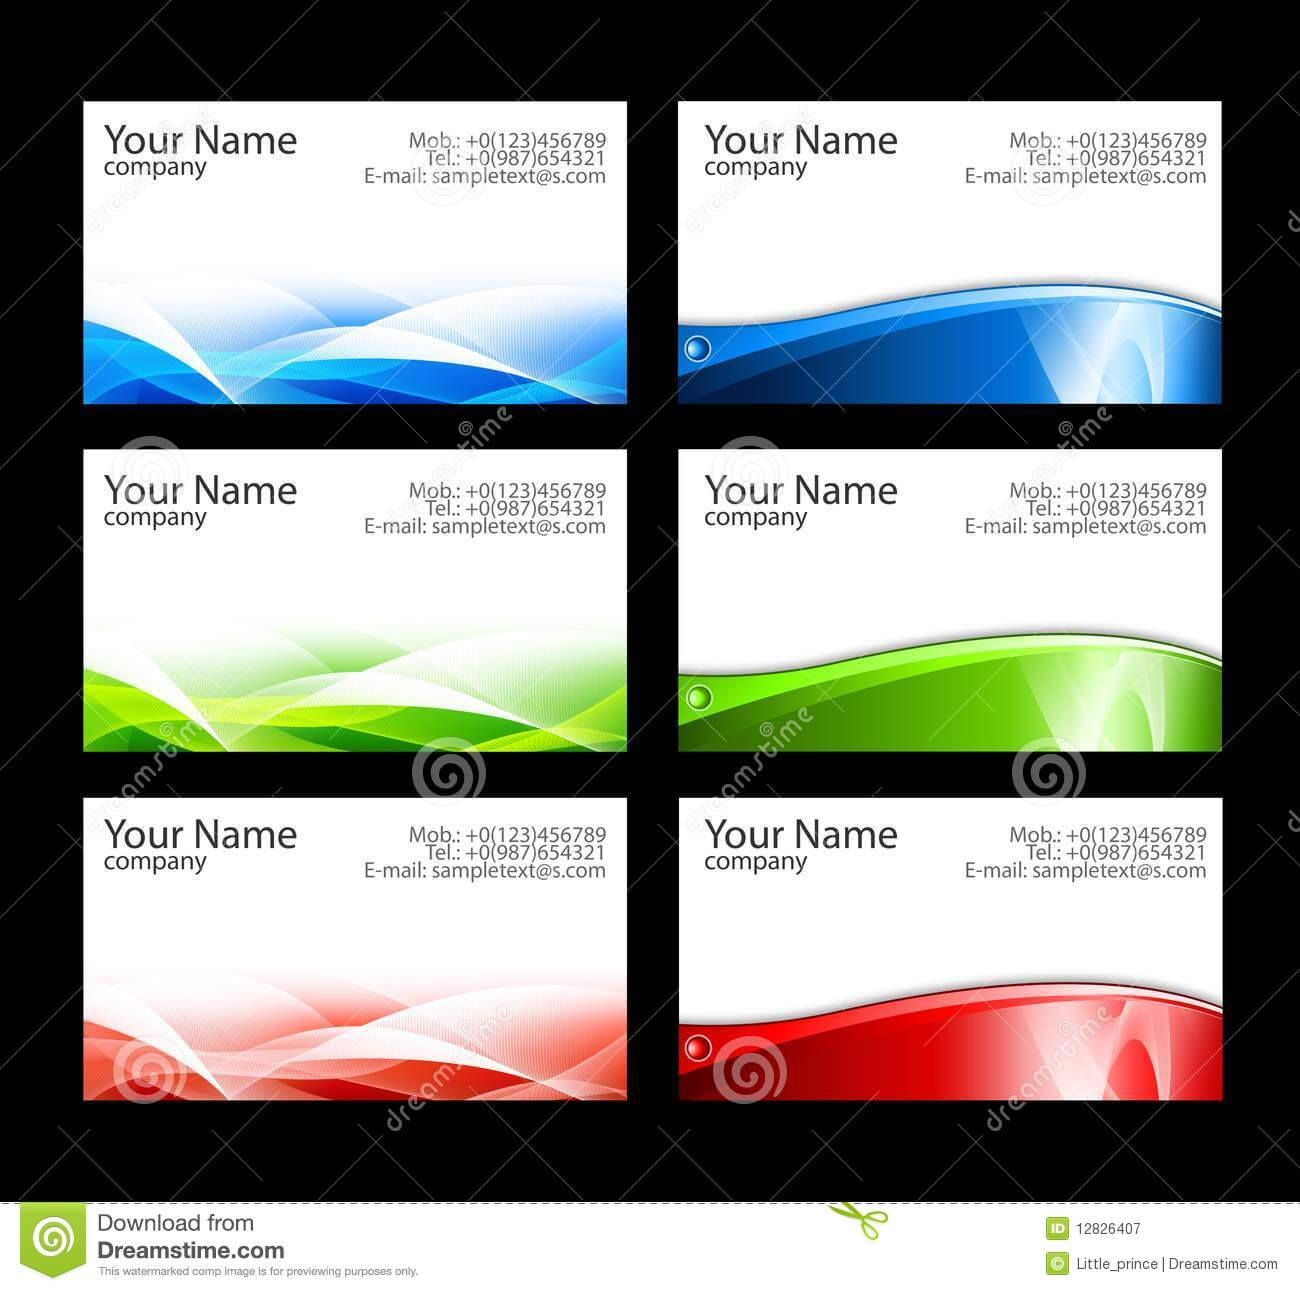 15 Free Avery Business Card Templates Images – Free Business Pertaining To Free Business Cards Templates For Word